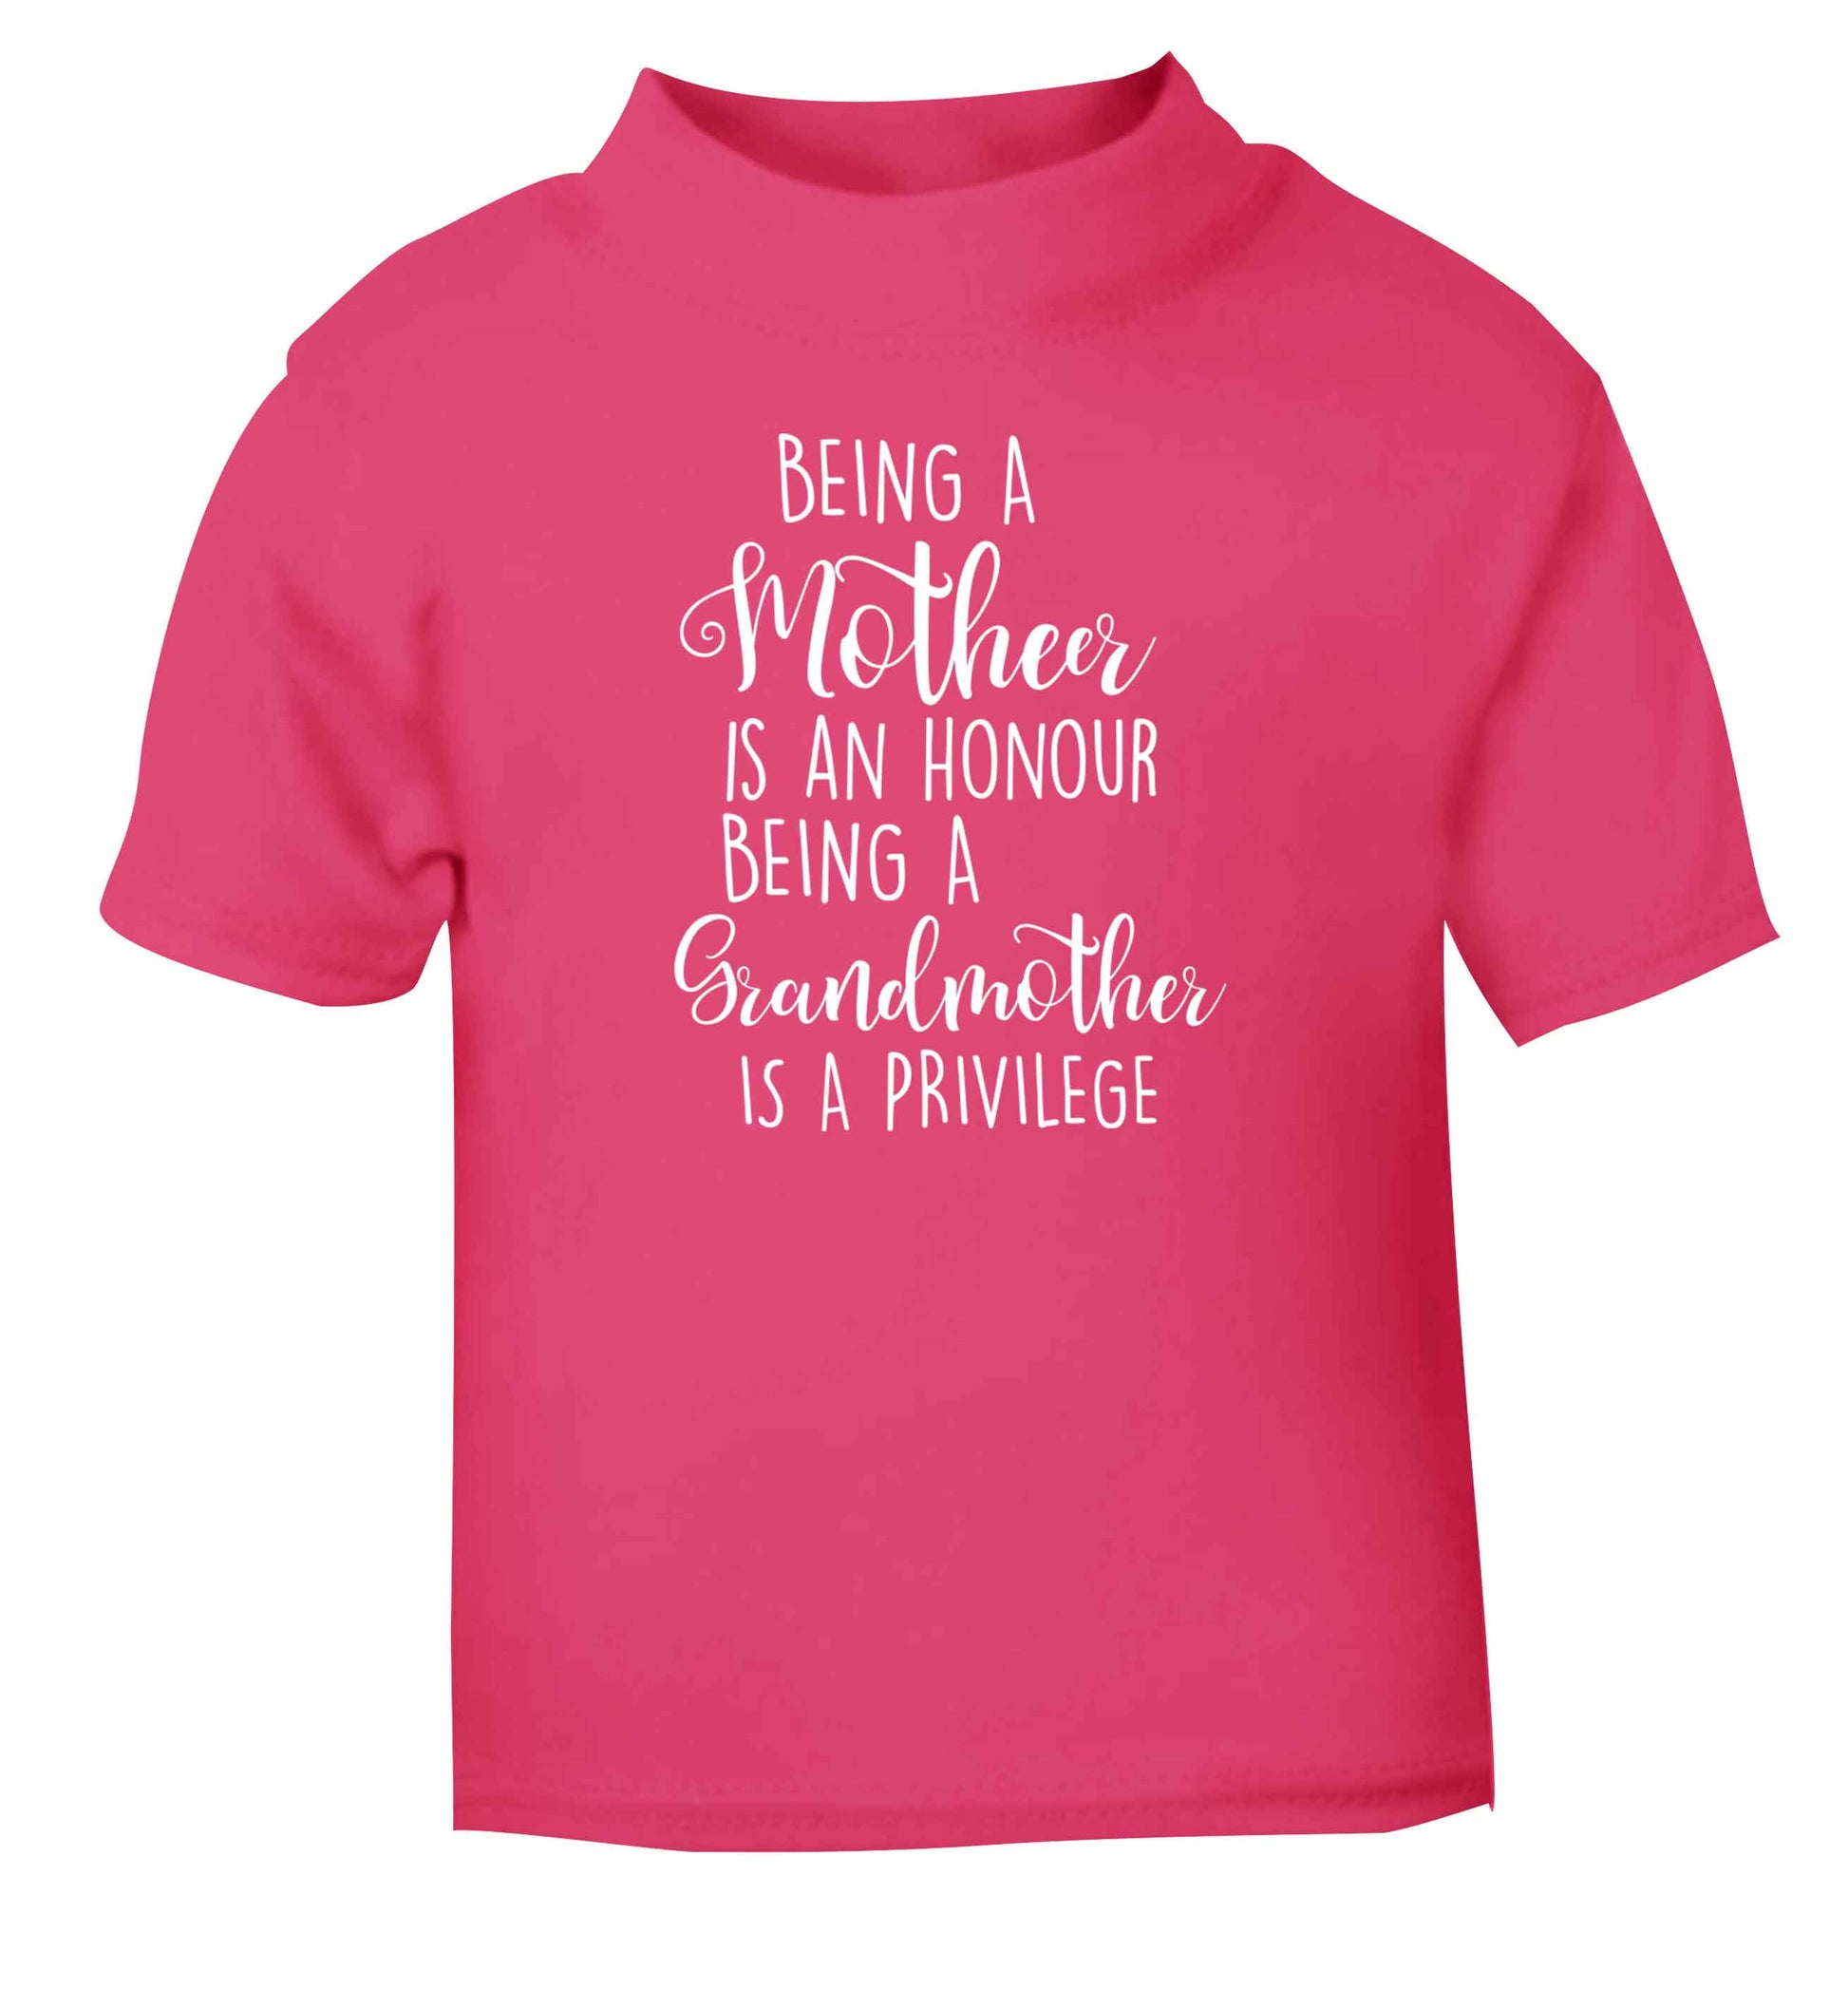 Being a mother is an honour being an grandmother is a privilege pink Baby Toddler Tshirt 2 Years